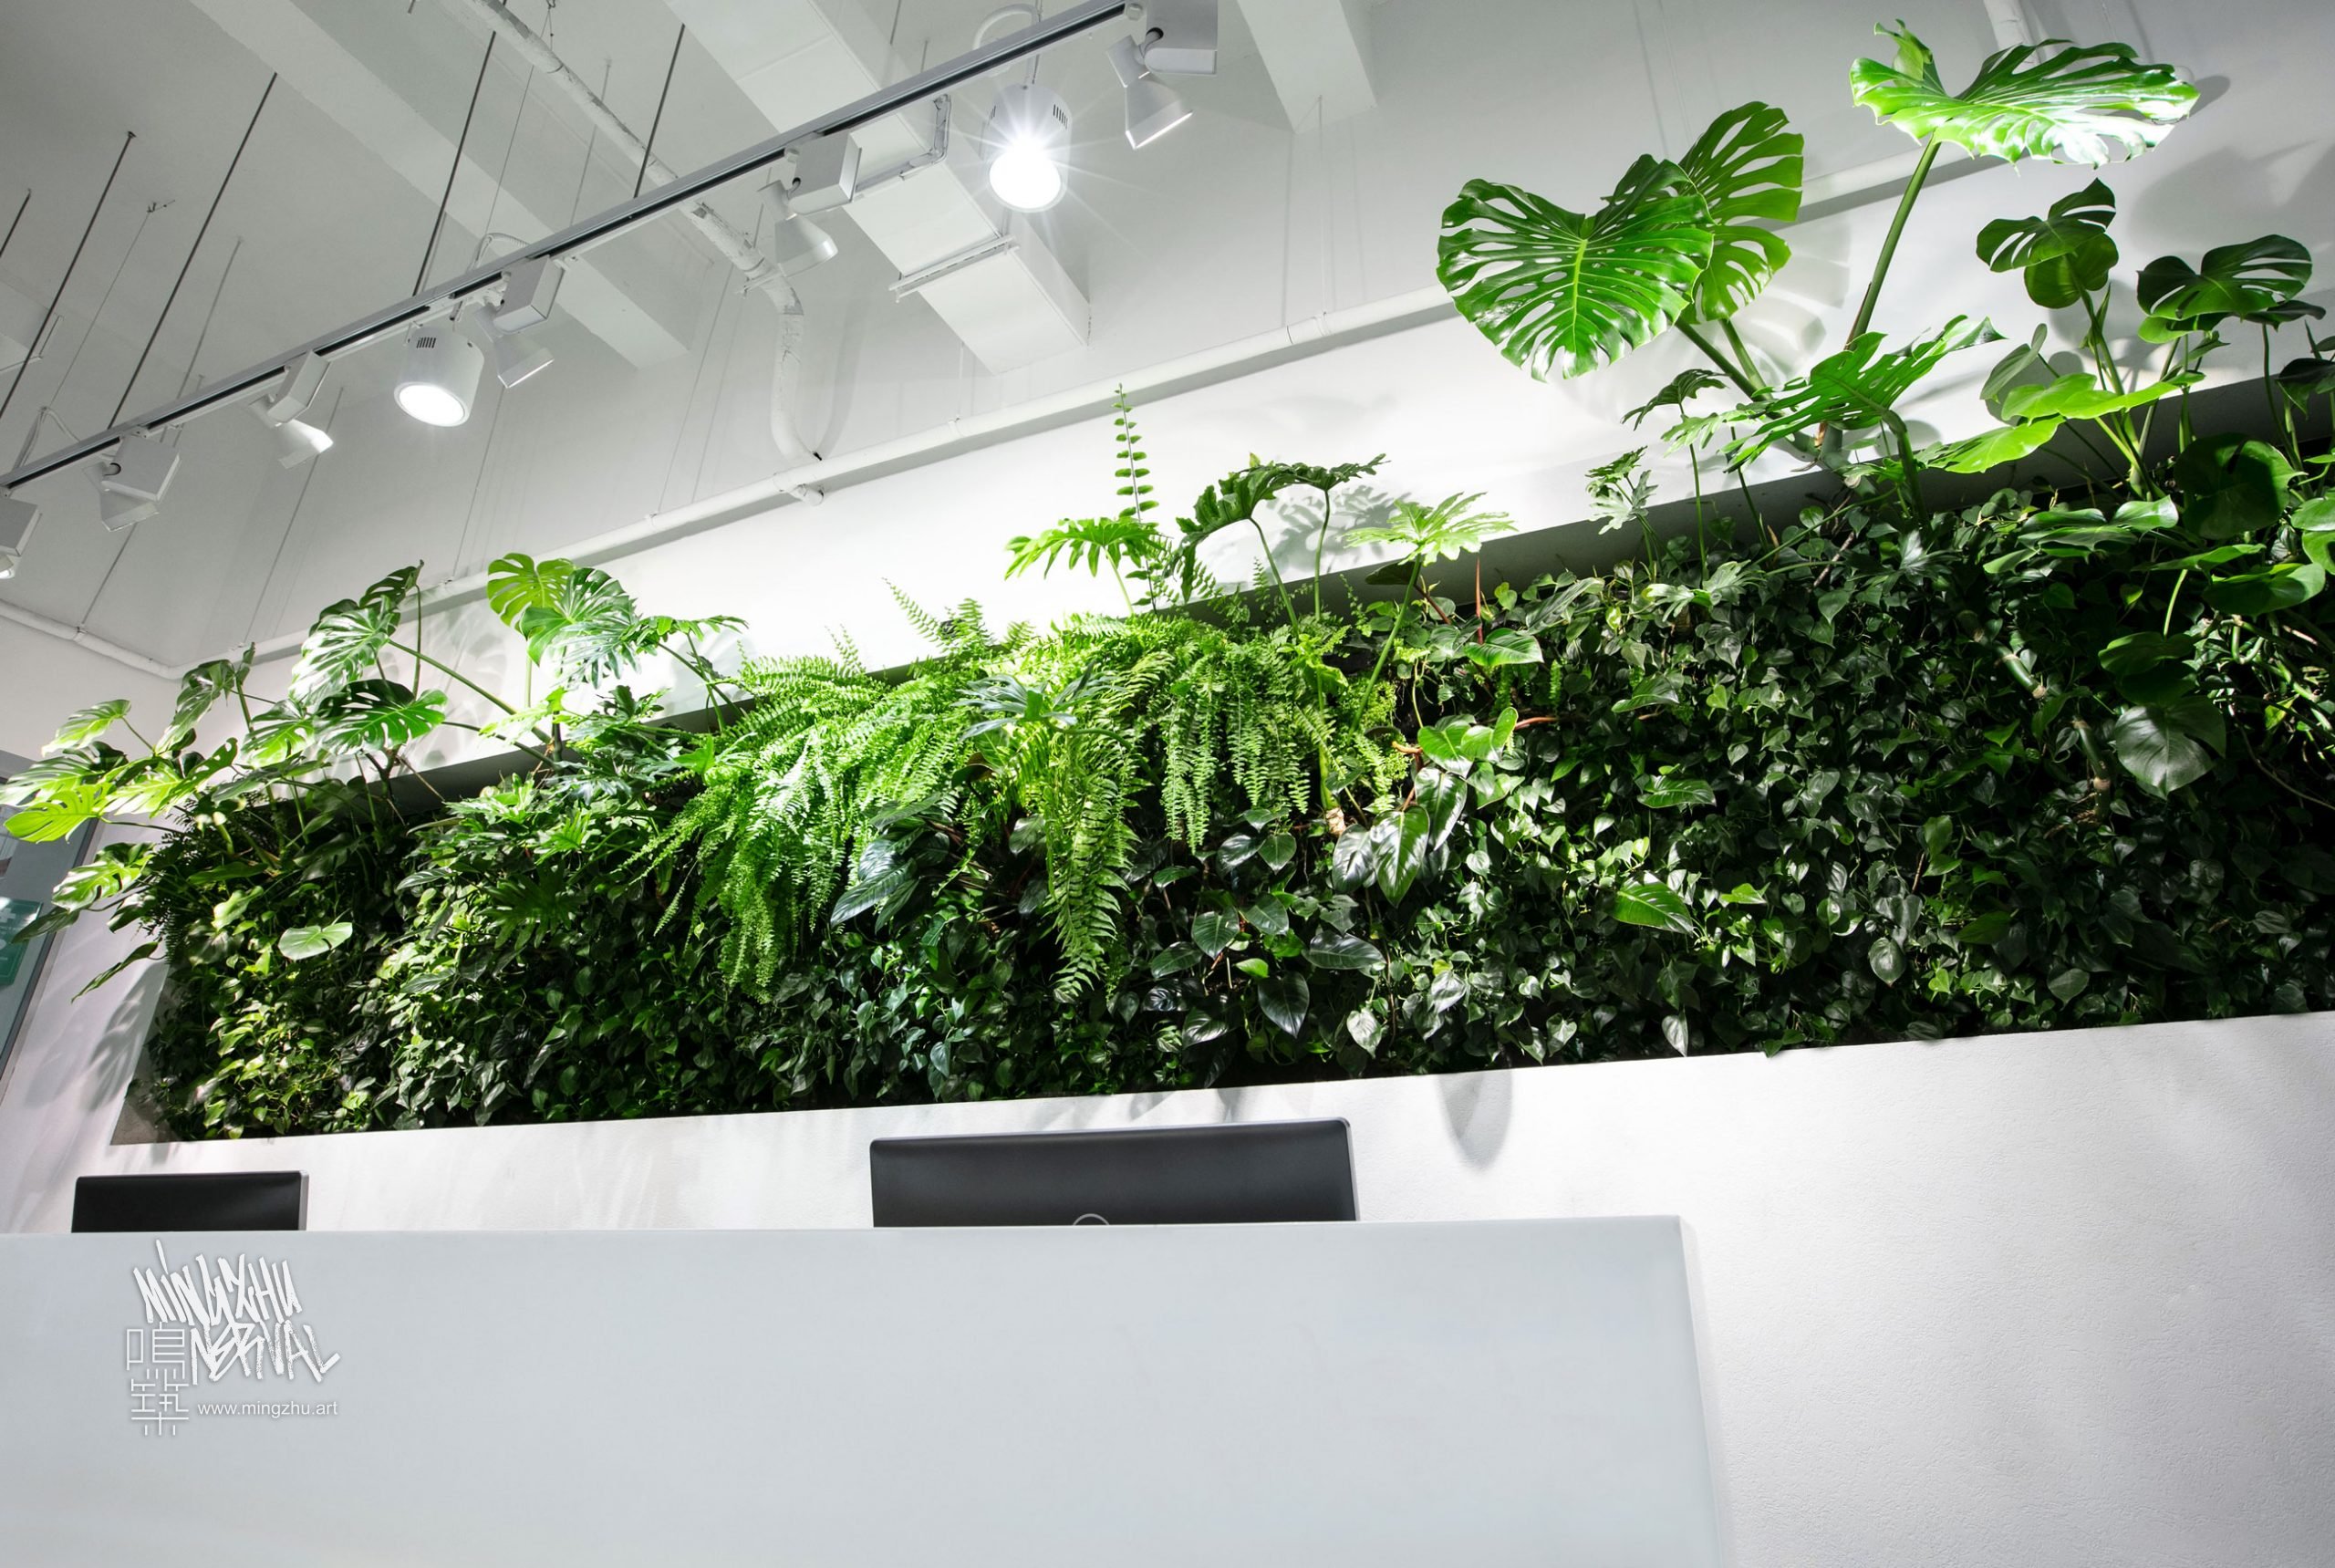 Mingzhu Nerval vertical living wall experts created a healthy nature workspace at AkzoNobel in Shanghai, 2019